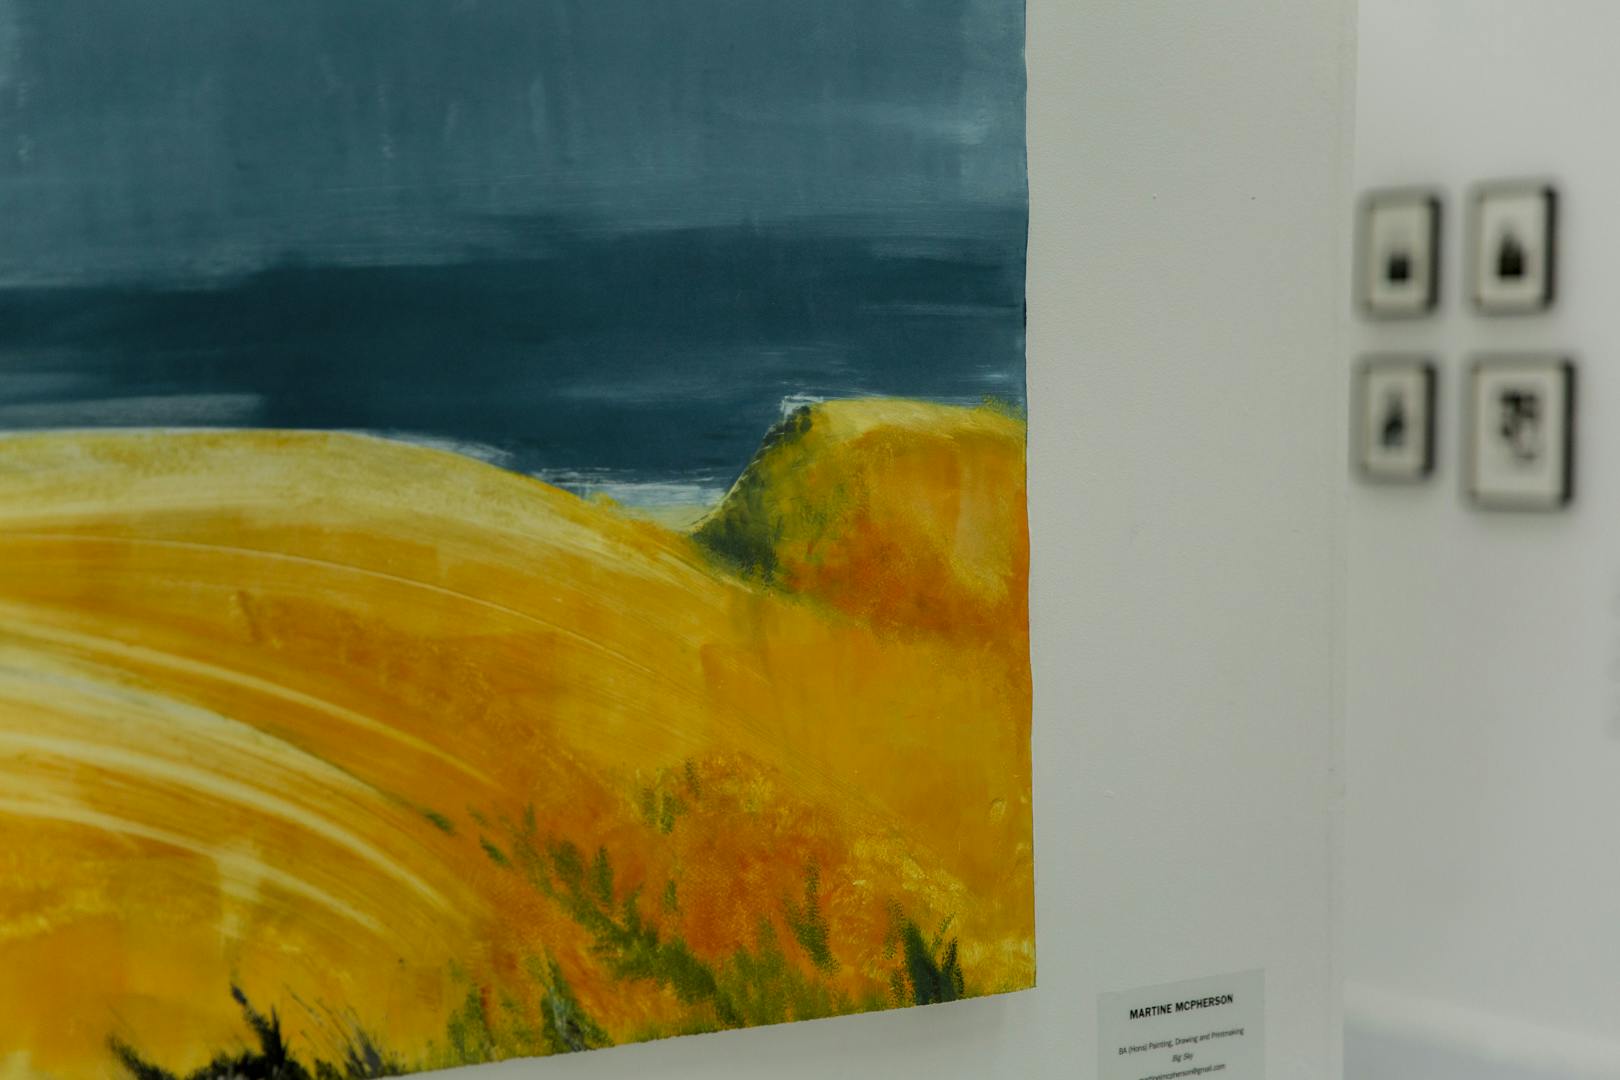 A close up shot of Martine's work in exhibition, with the painting featuring a landscape image and blue and orange colour tones